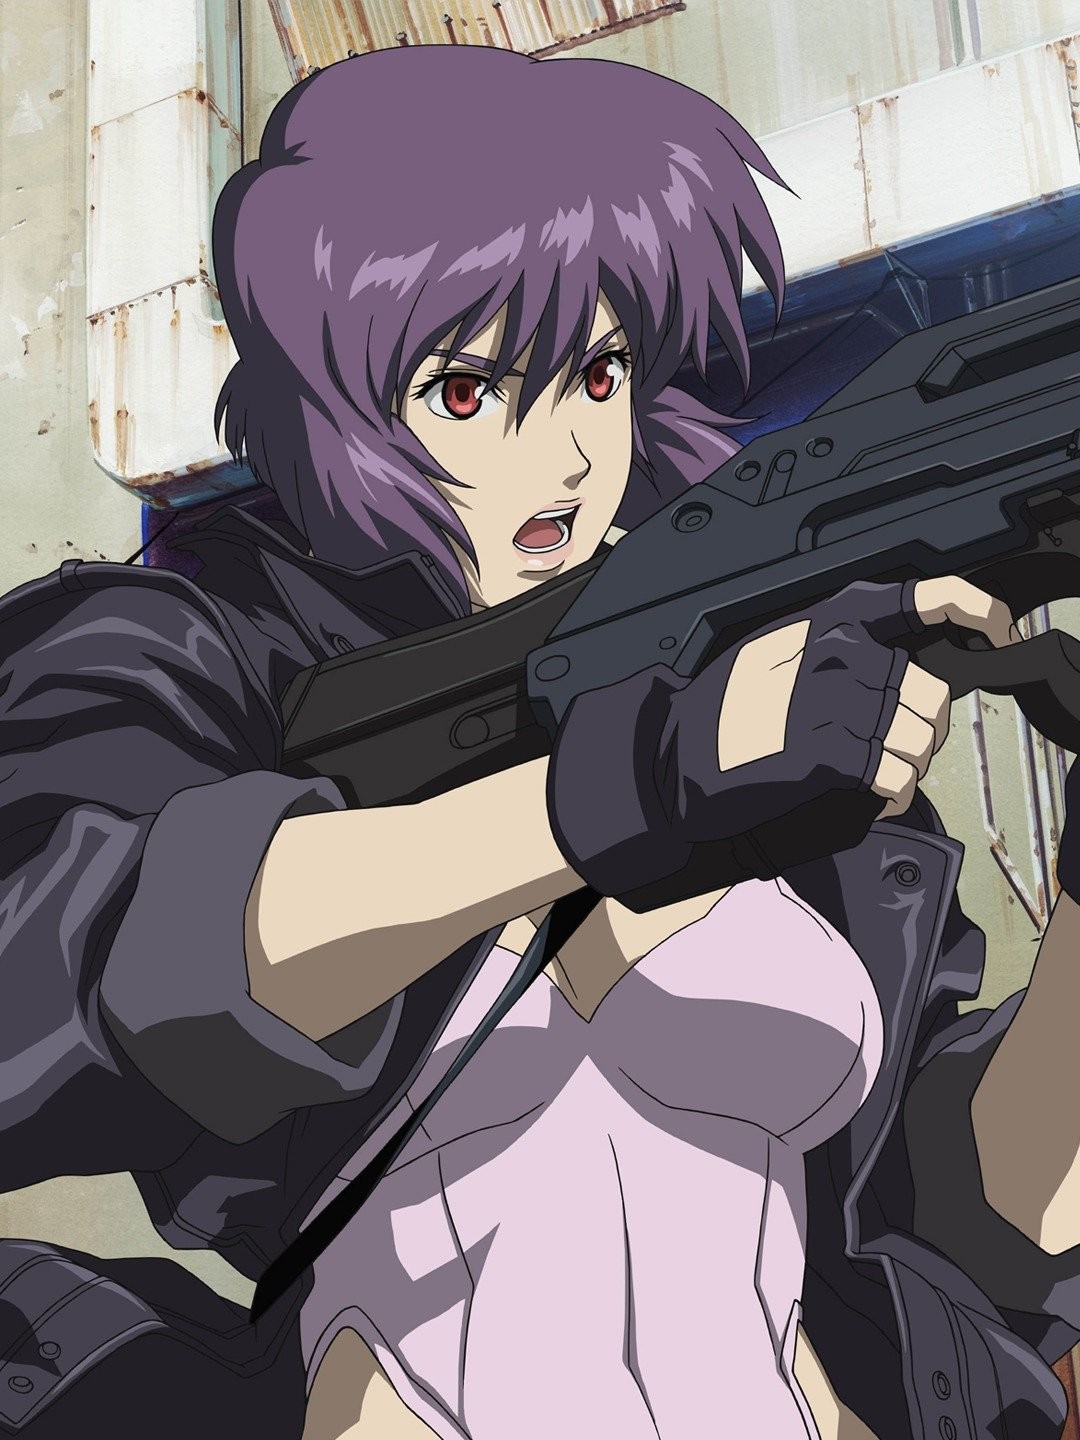 How Ghost in the Shell: Stand Alone Complex Went From Massive Risk